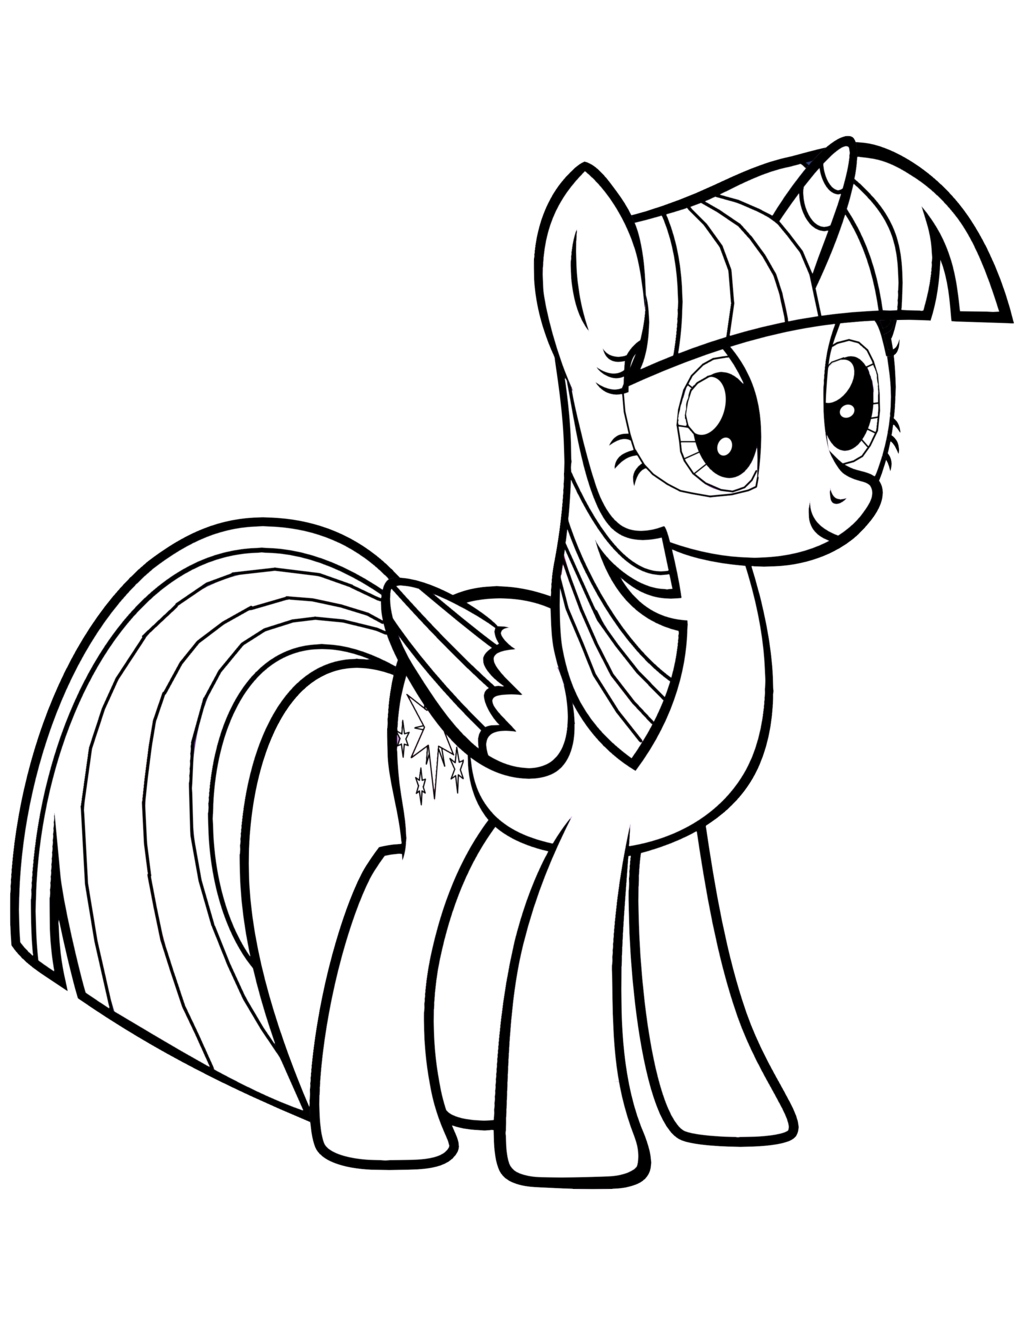 Coloring Pages : My Little Pony Alicorn Coloring Pages For Kids ...